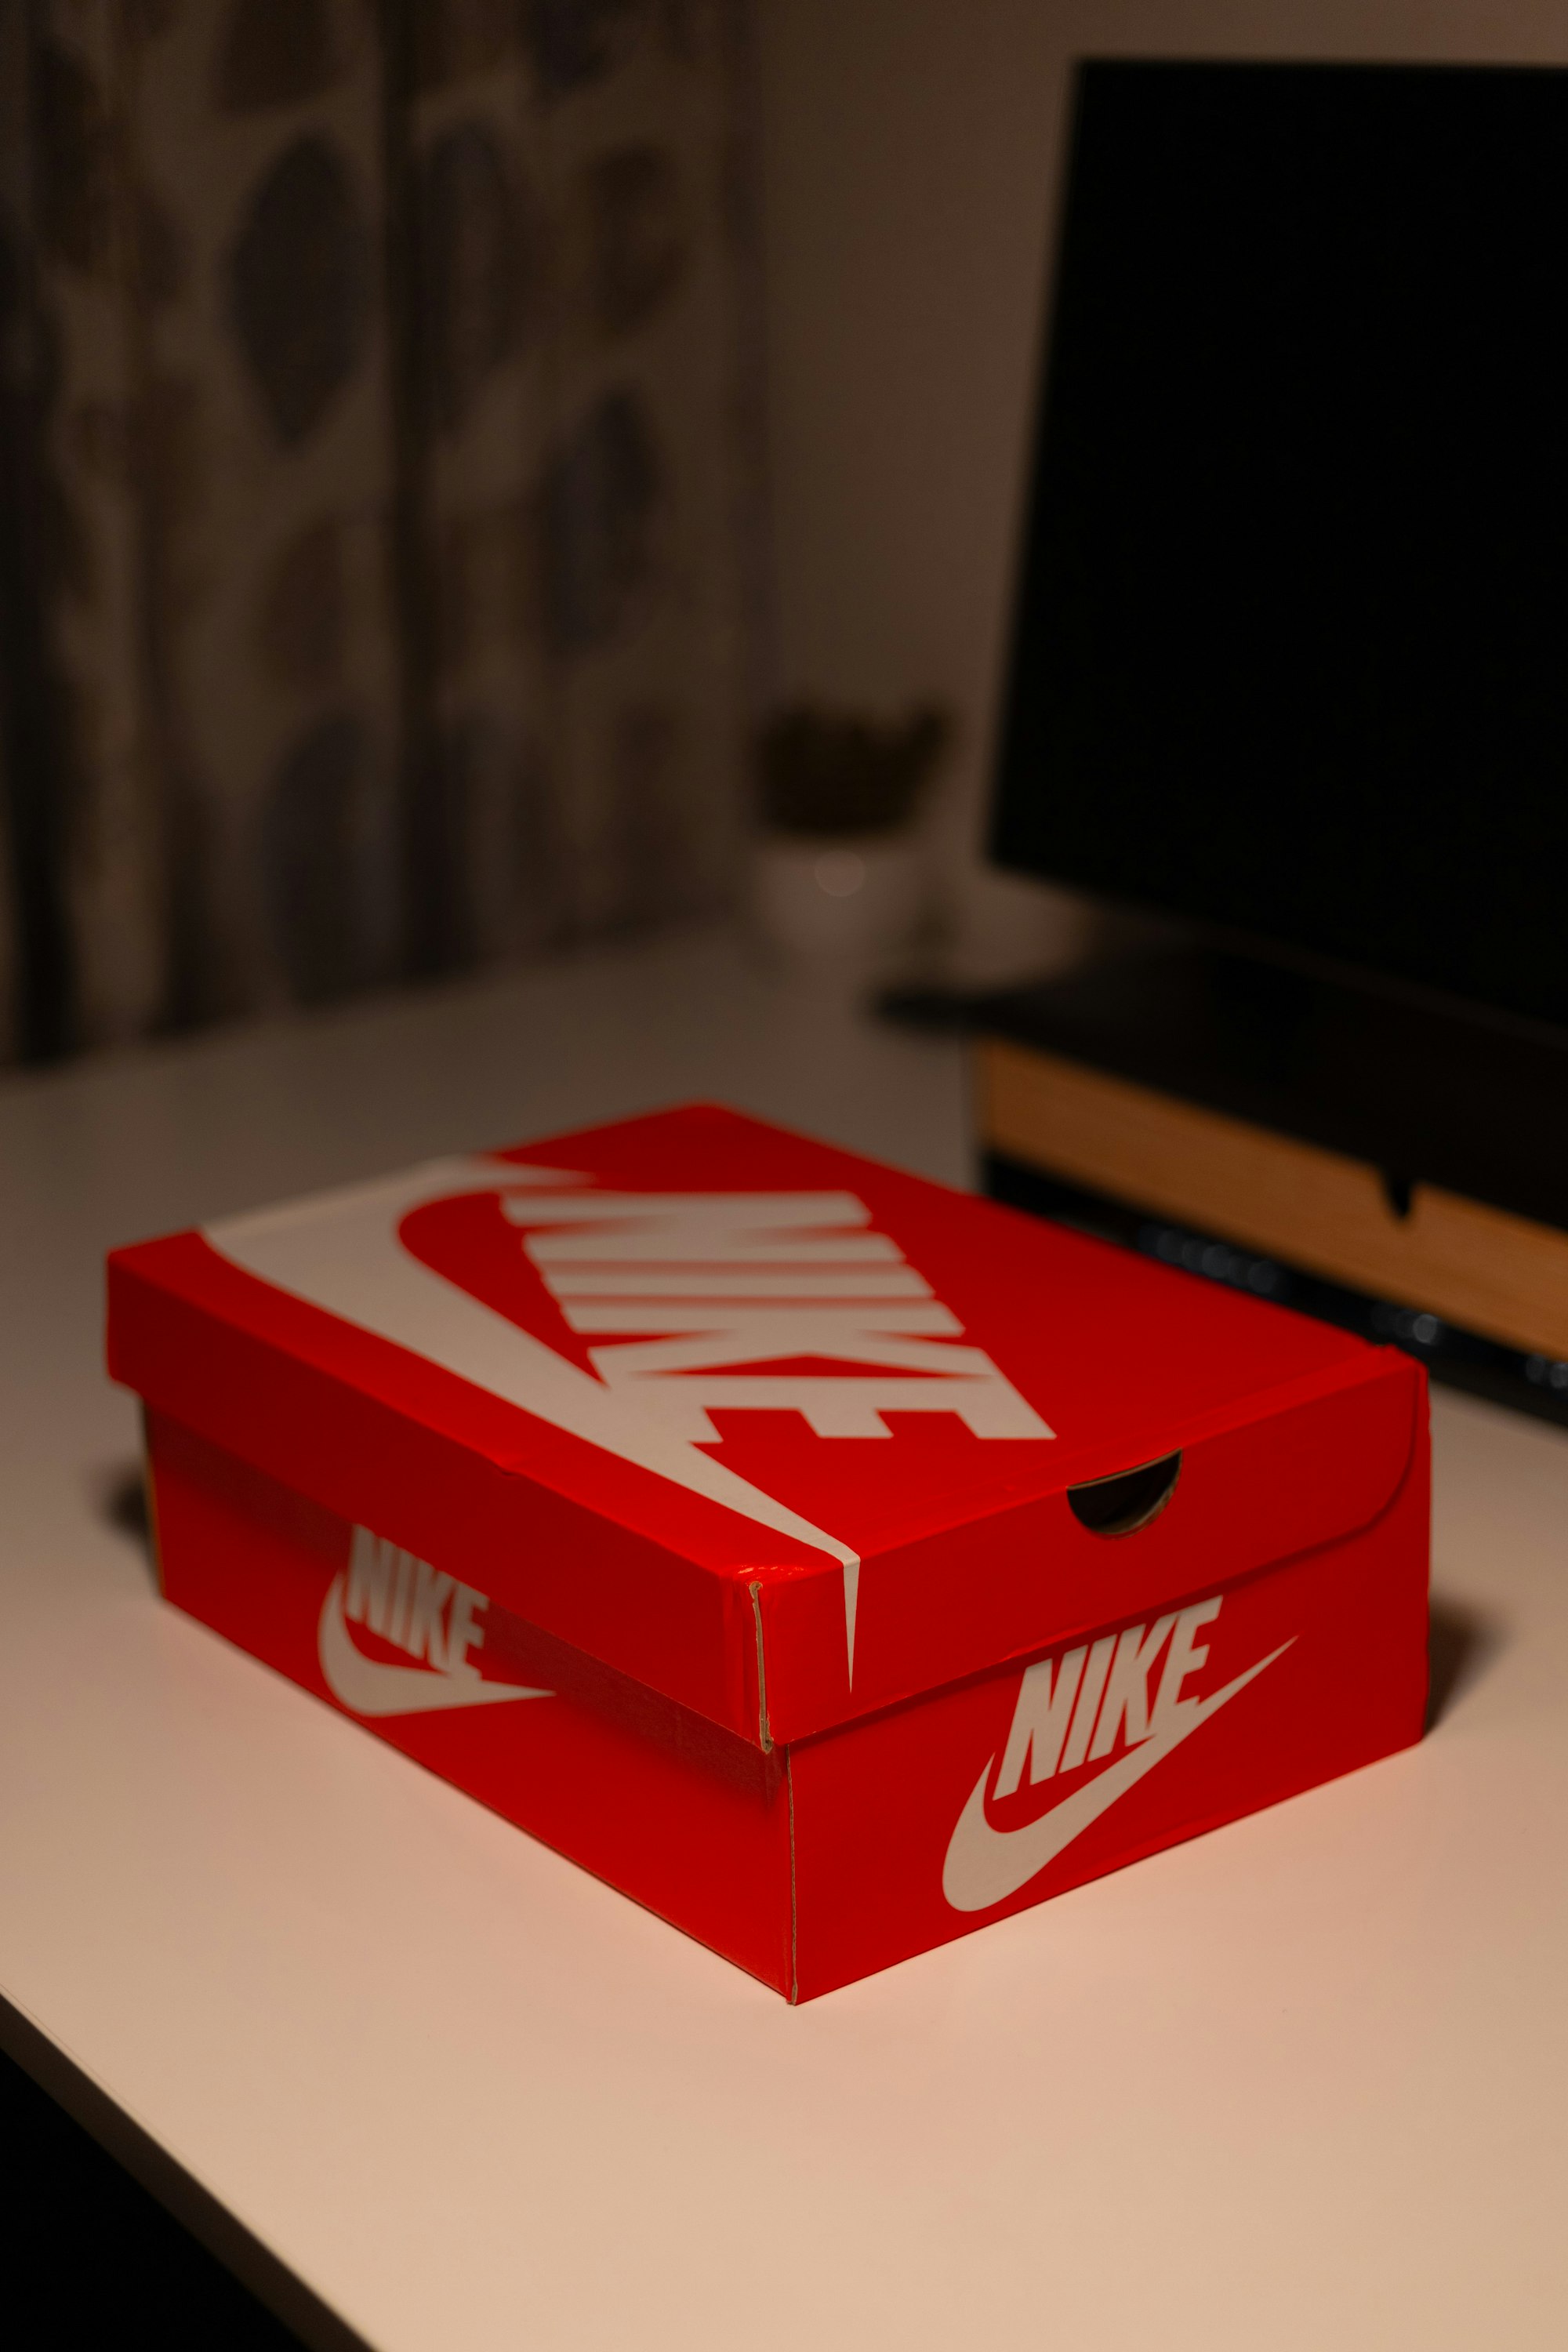 A red Nike shoebox sitting on a table